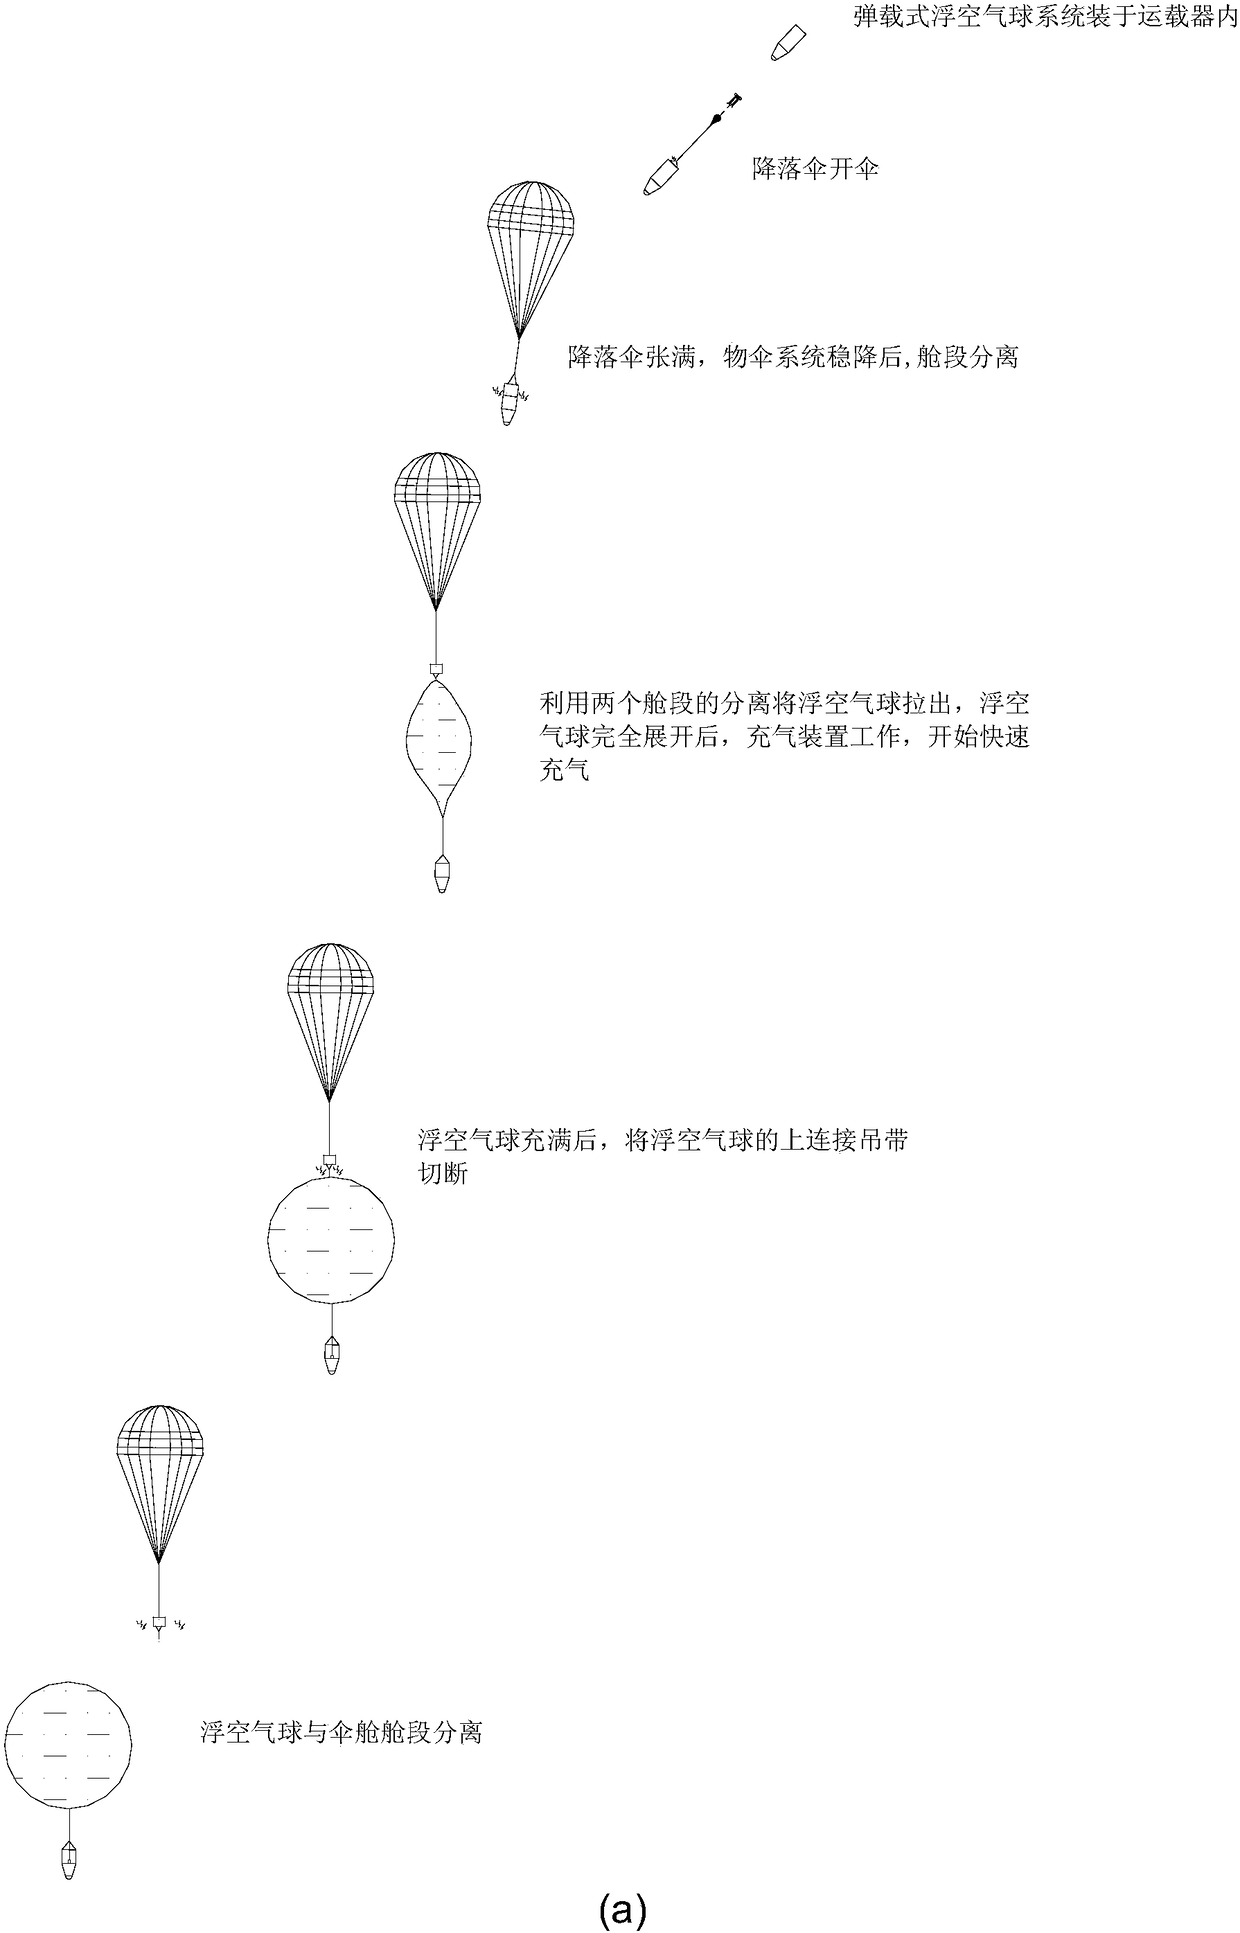 A bomb-borne floating air balloon system